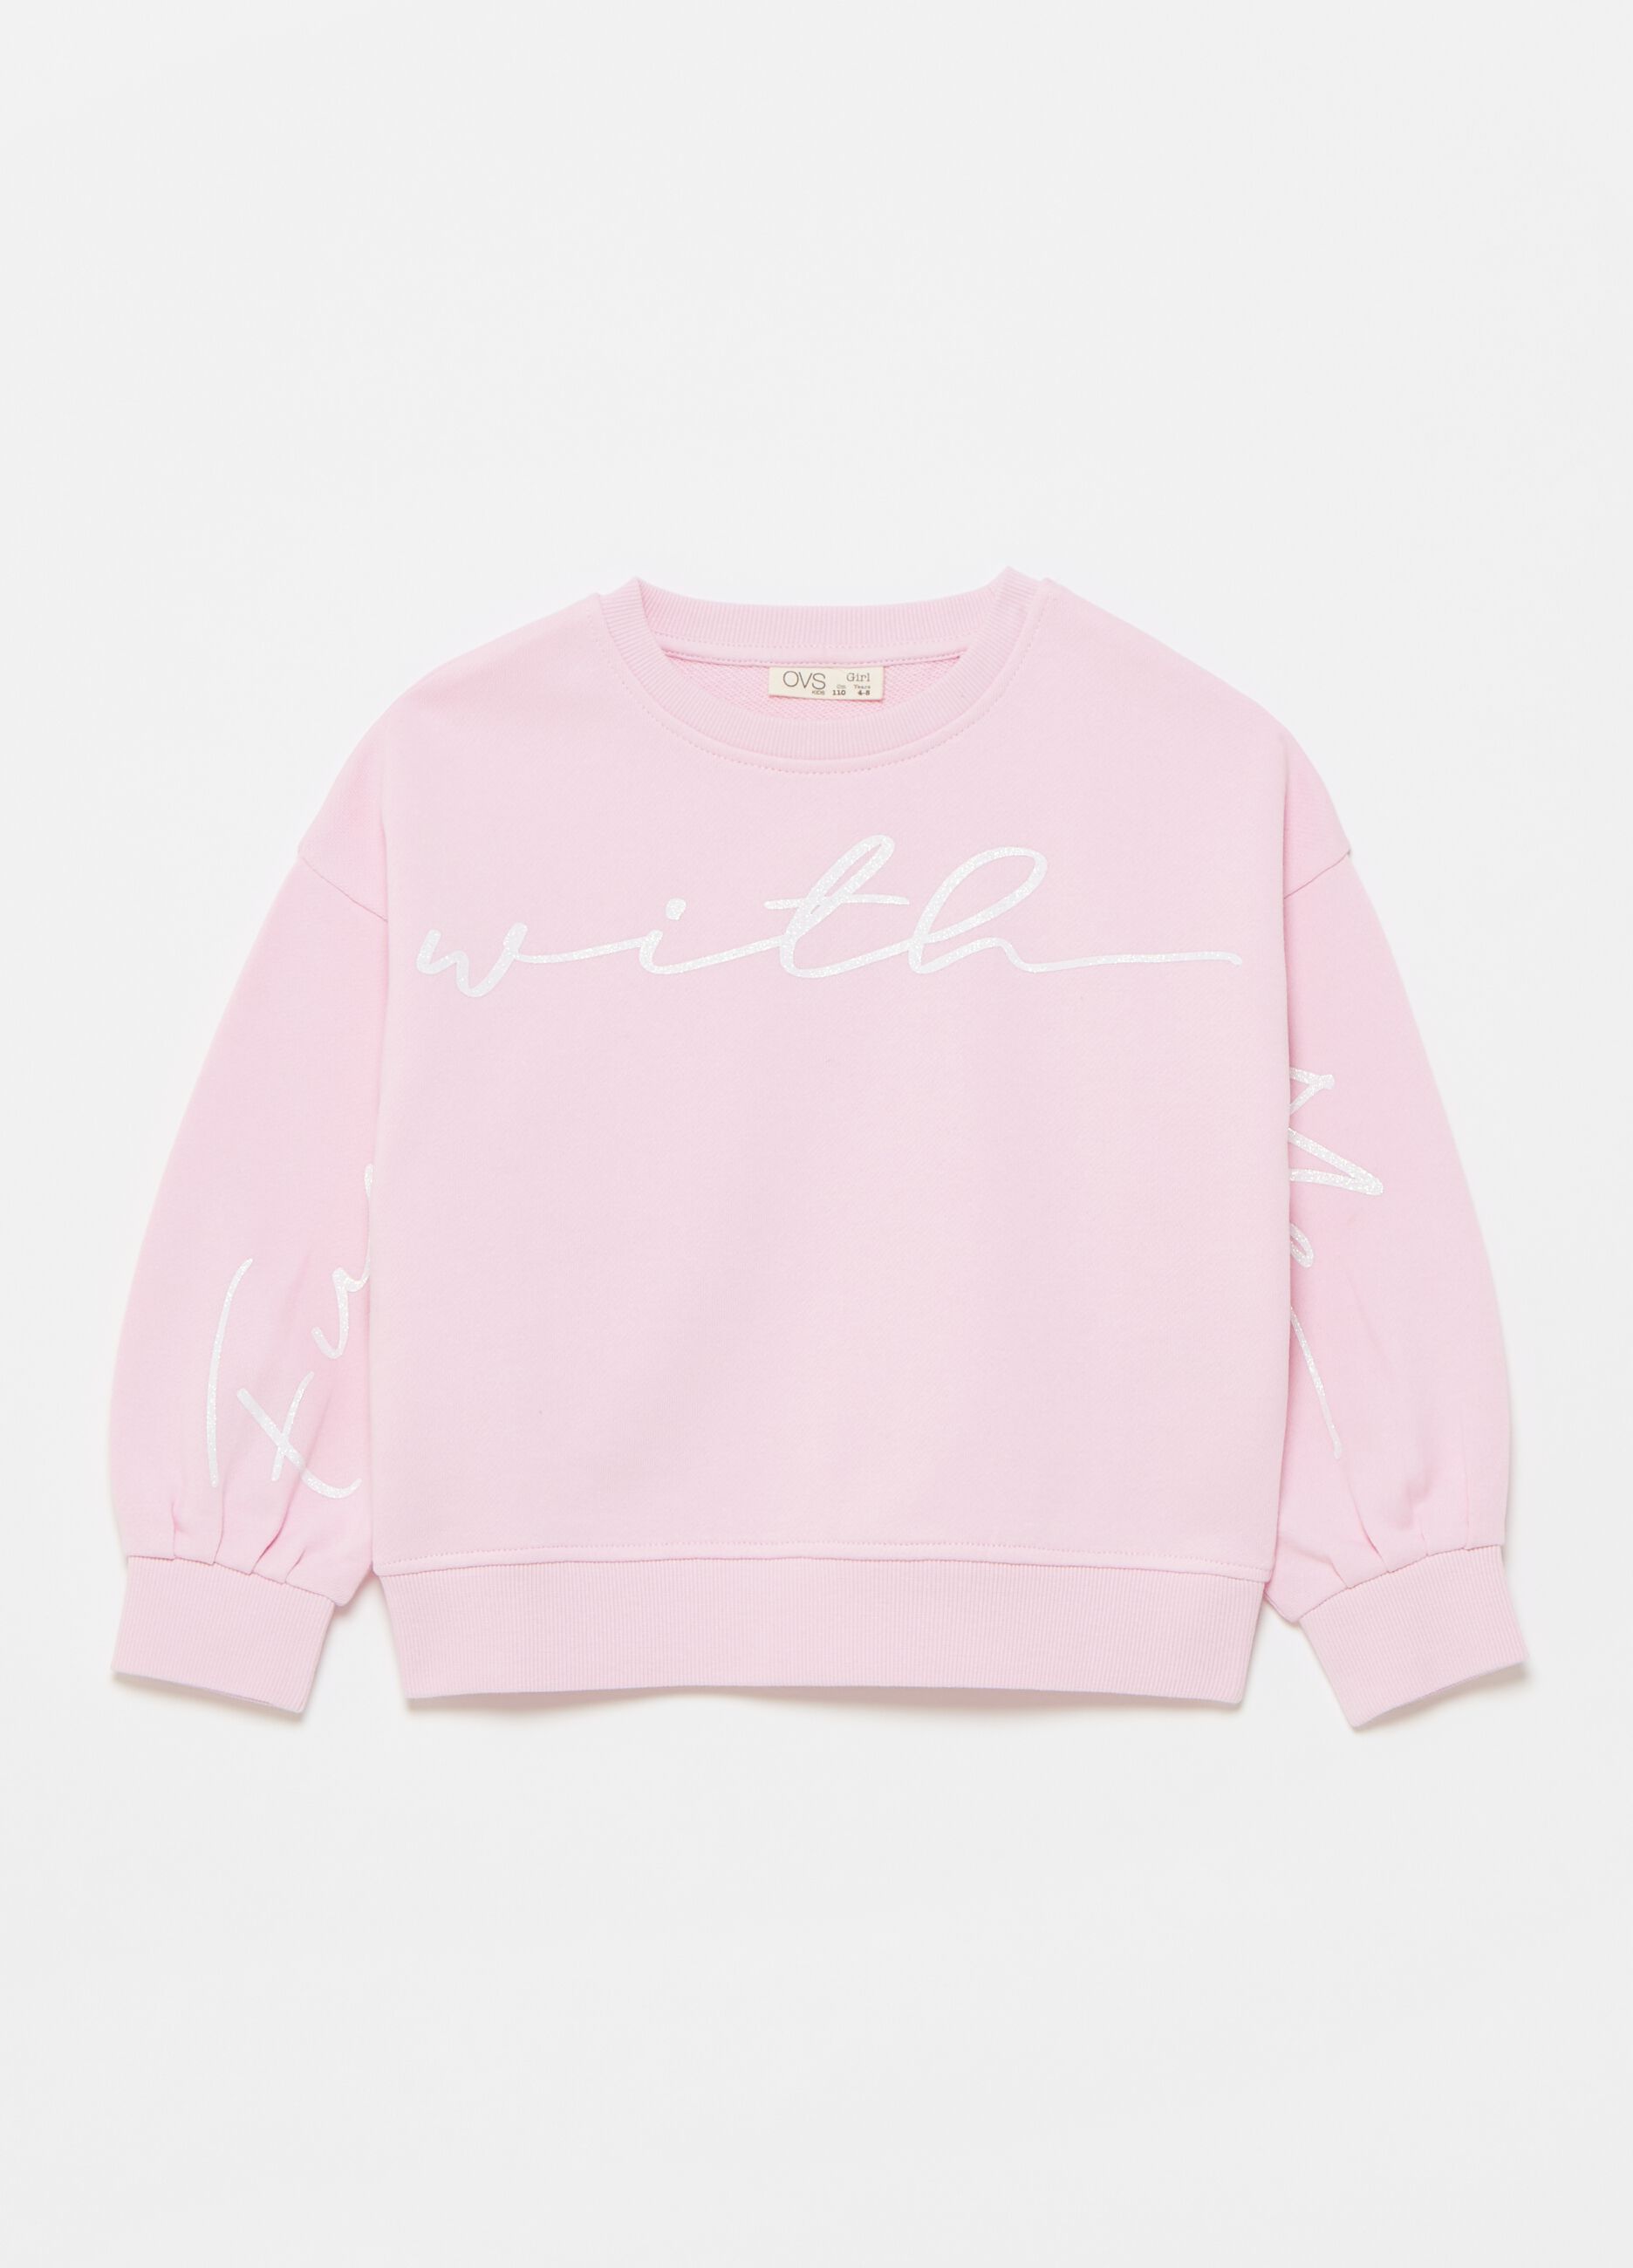 100% cotton sweatshirt with printed lettering